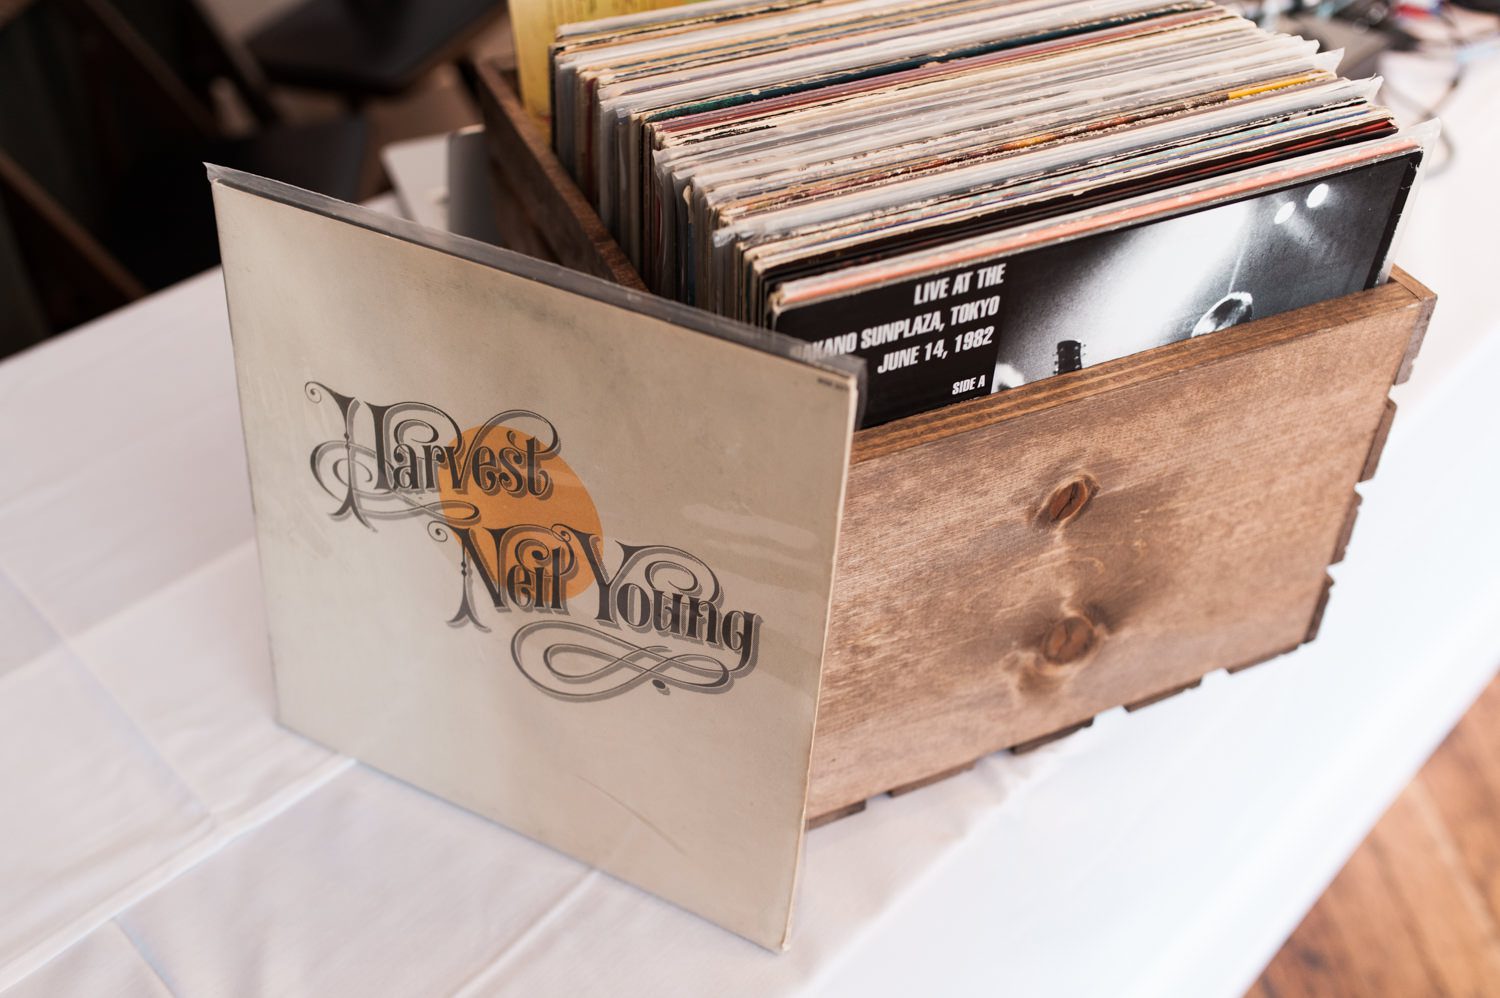 Vintage records by Ace Hotel wedding photographer Briana Morrison